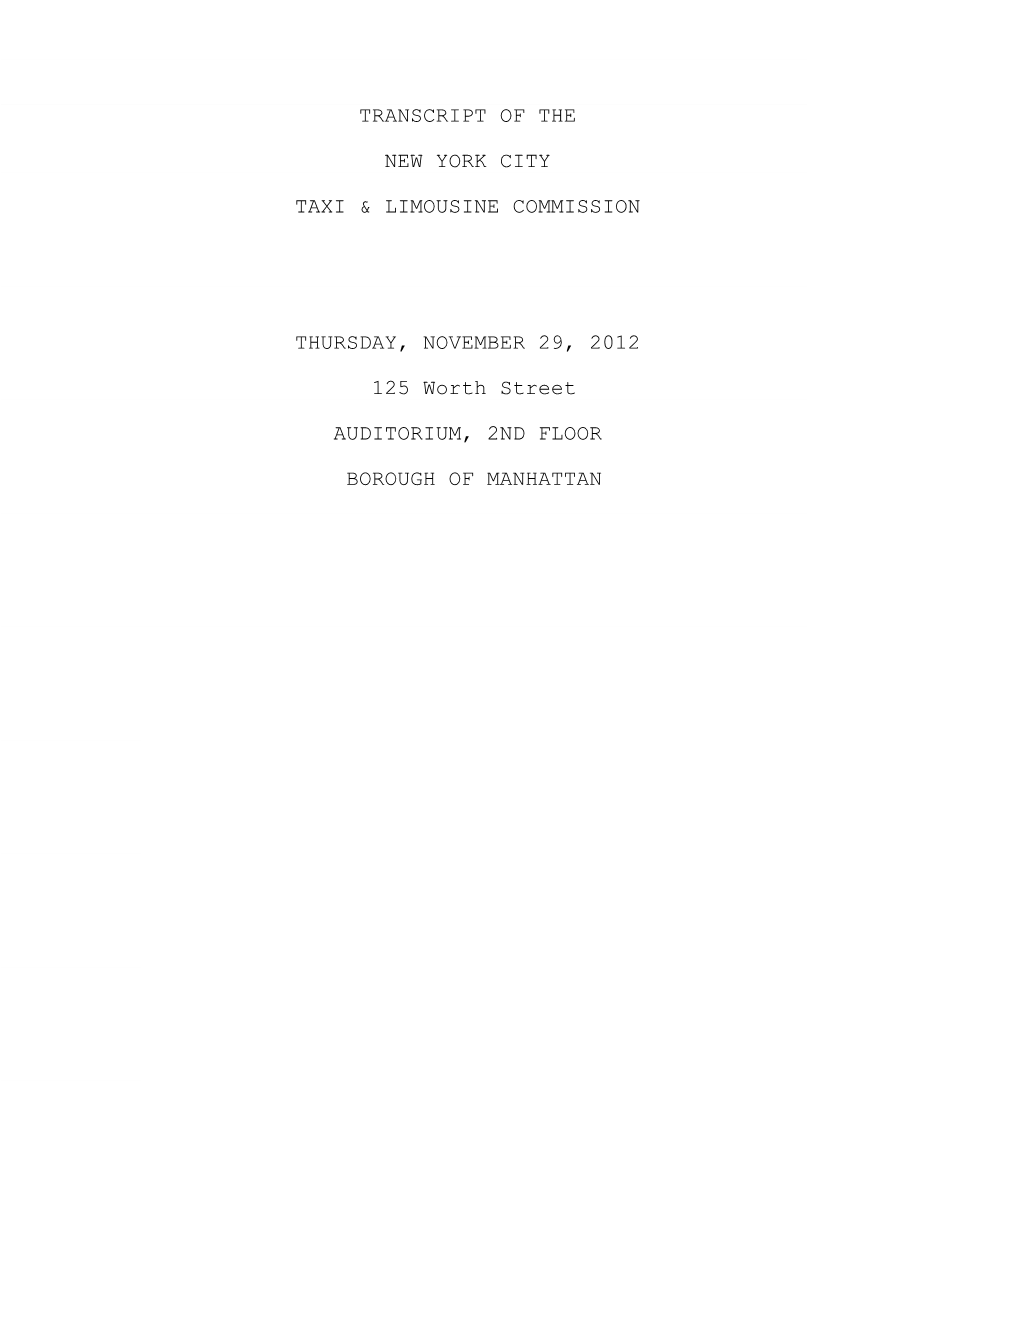 TRANSCRIPT of the NEW YORK CITY TAXI & LIMOUSINE COMMISSION THURSDAY, NOVEMBER 29, 2012 125 Worth Street